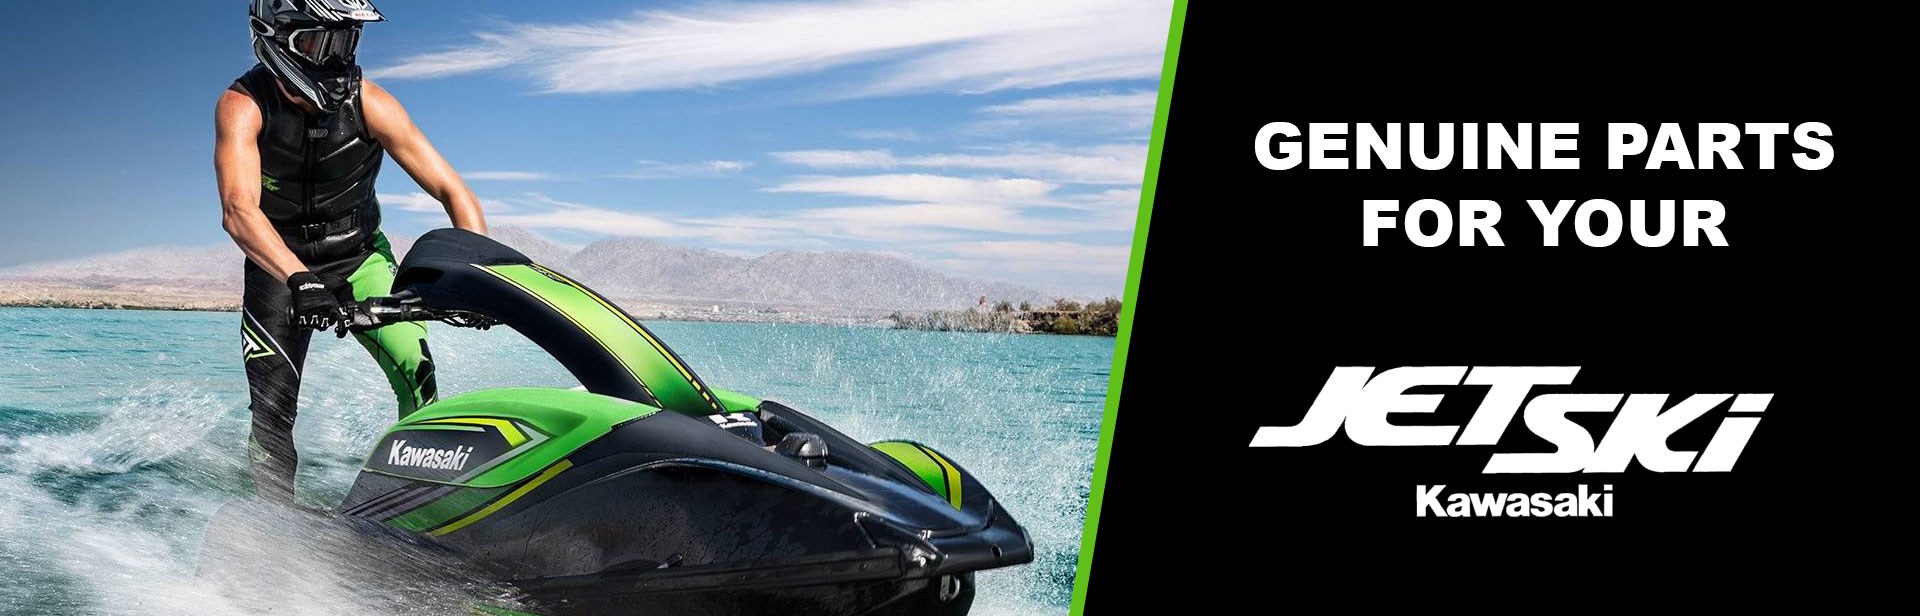 Find Genuine Parts for your Kawasaki Watercraft